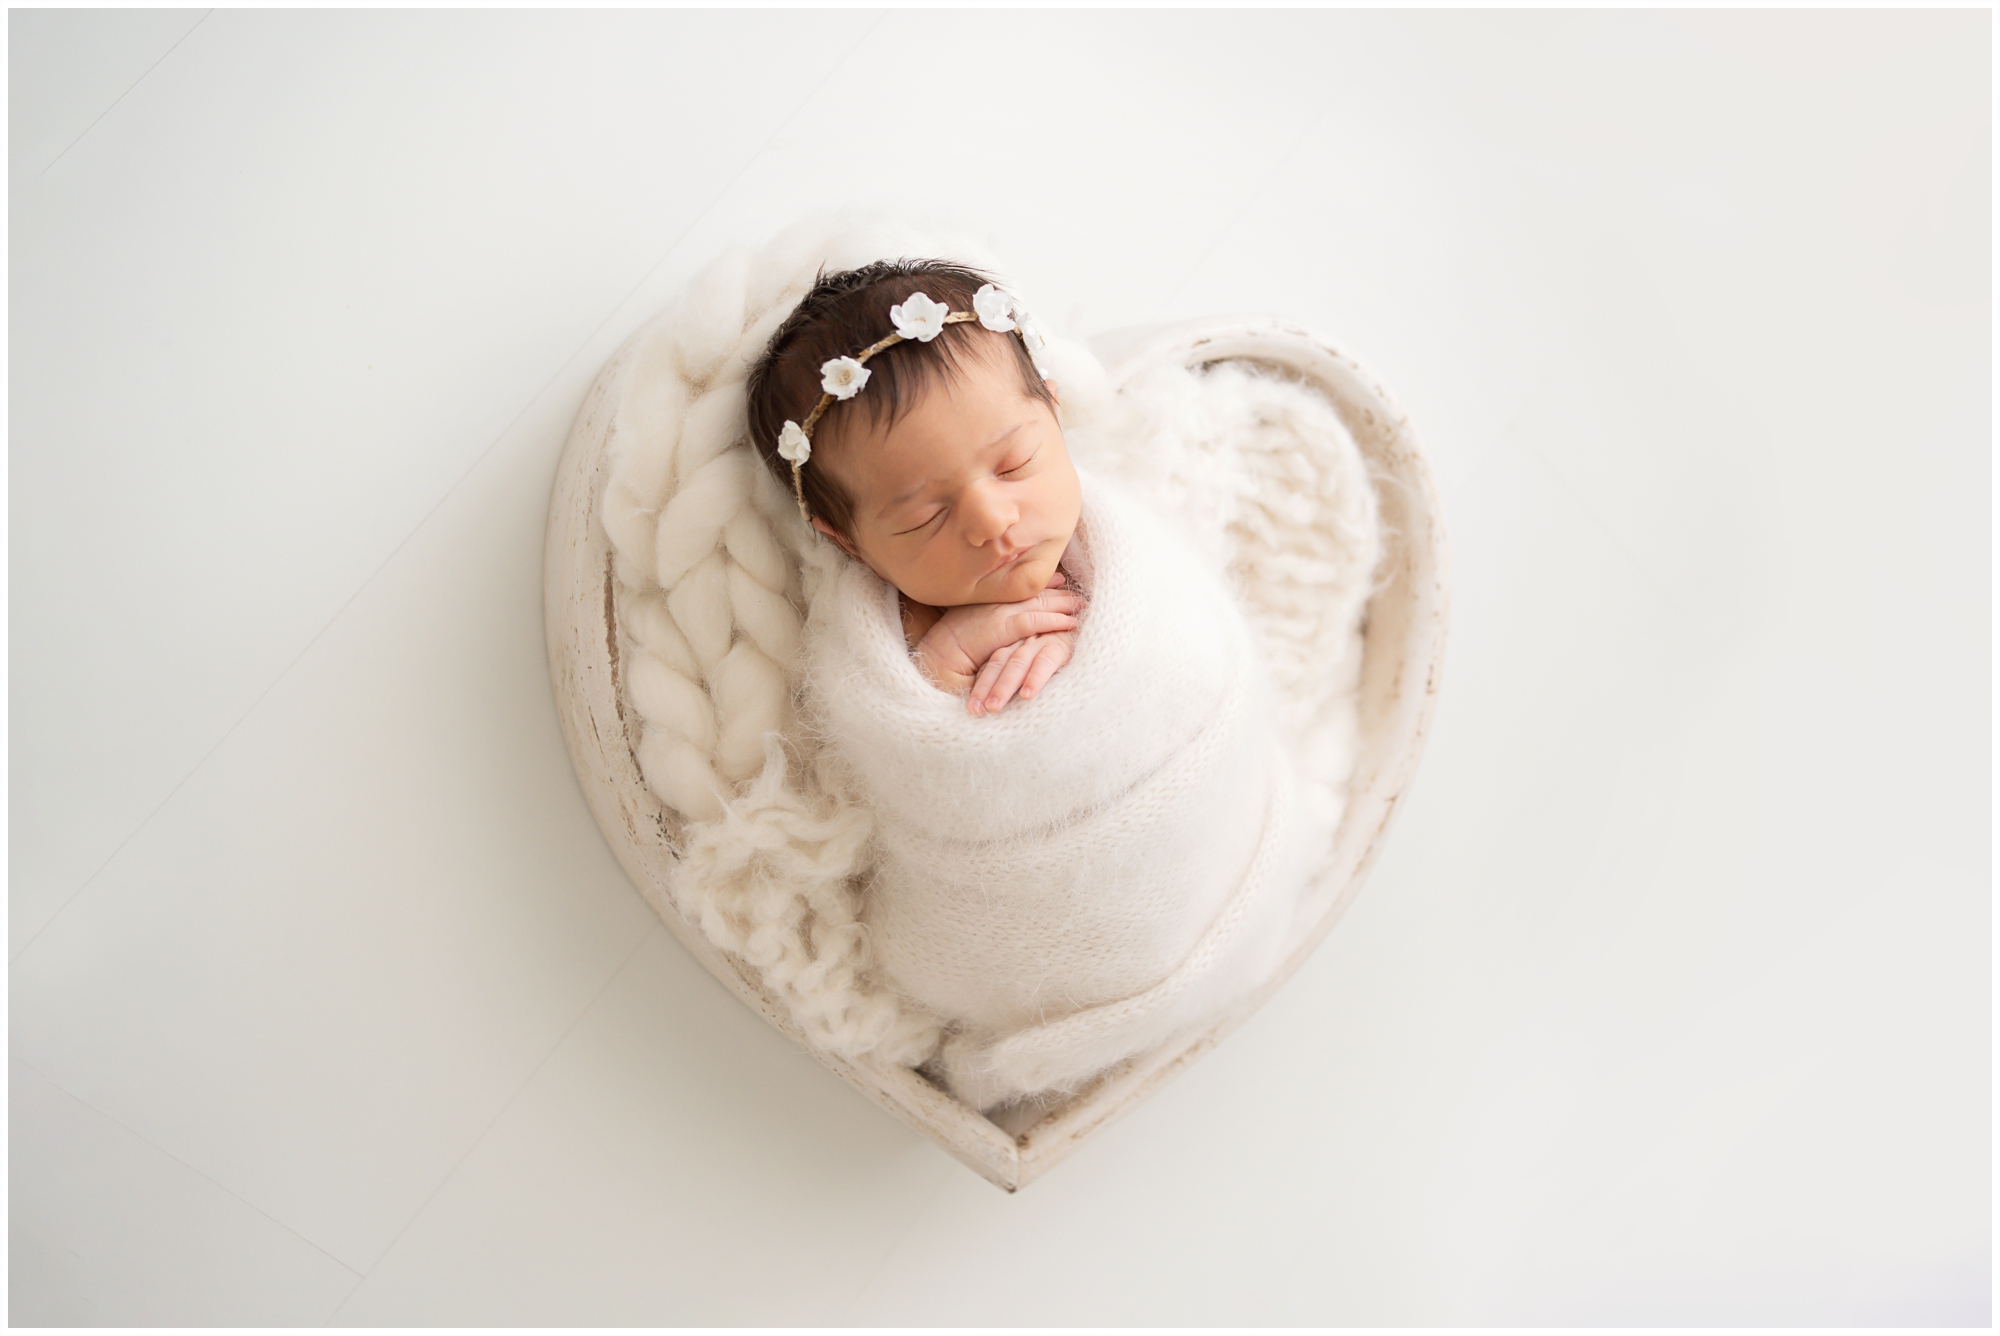 Brand new baby swaddled in white laying in a heart shaped bowl being photographed in Jupiter Fl studio